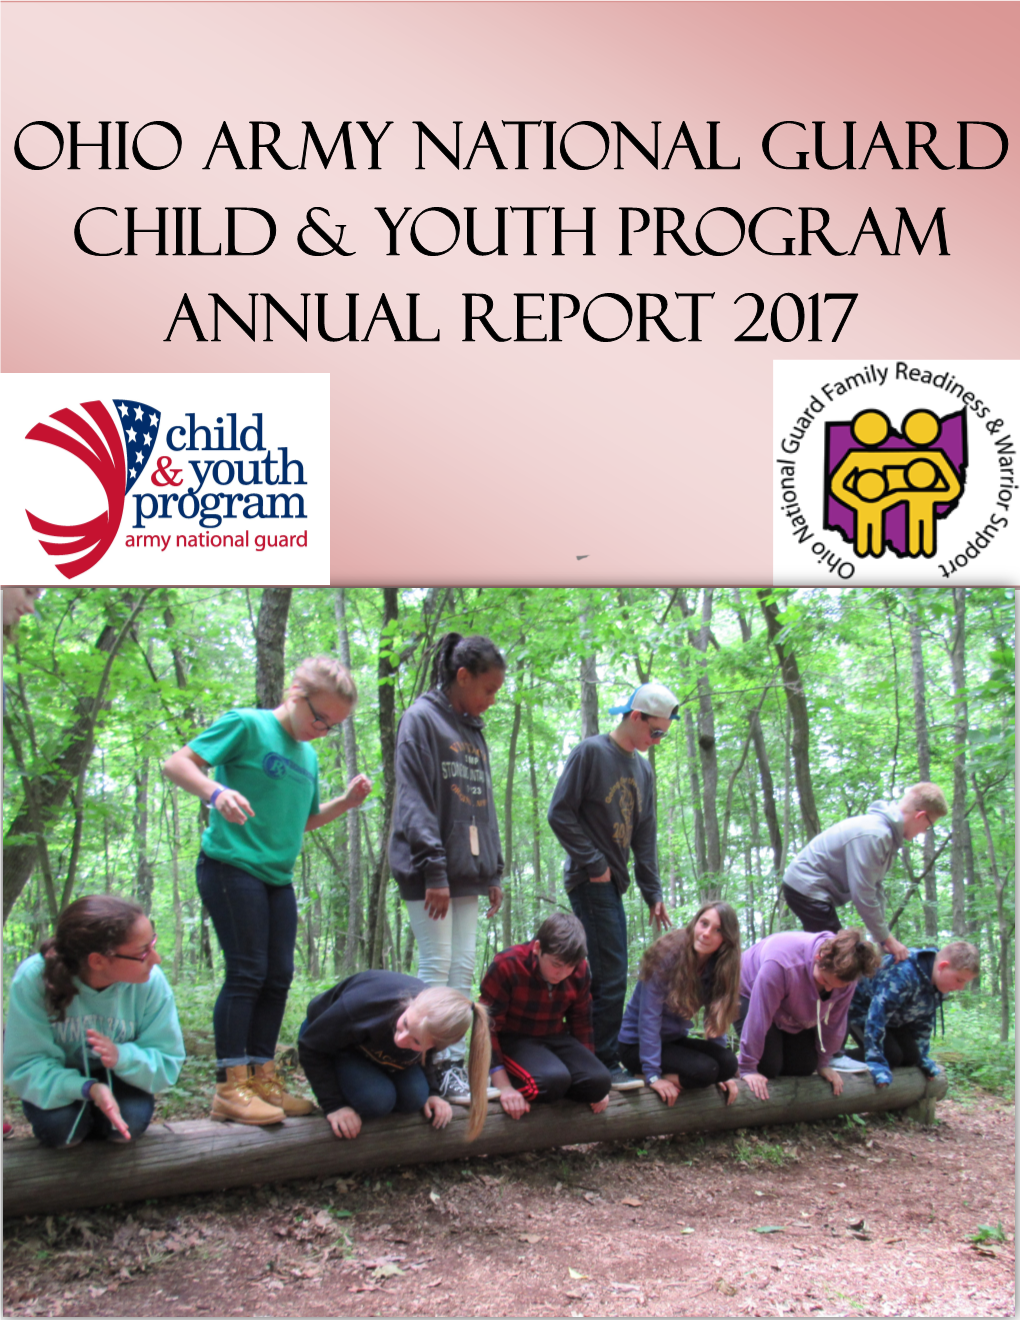 Ohio Army National Guard Child & Youth Program Annual Report 2017